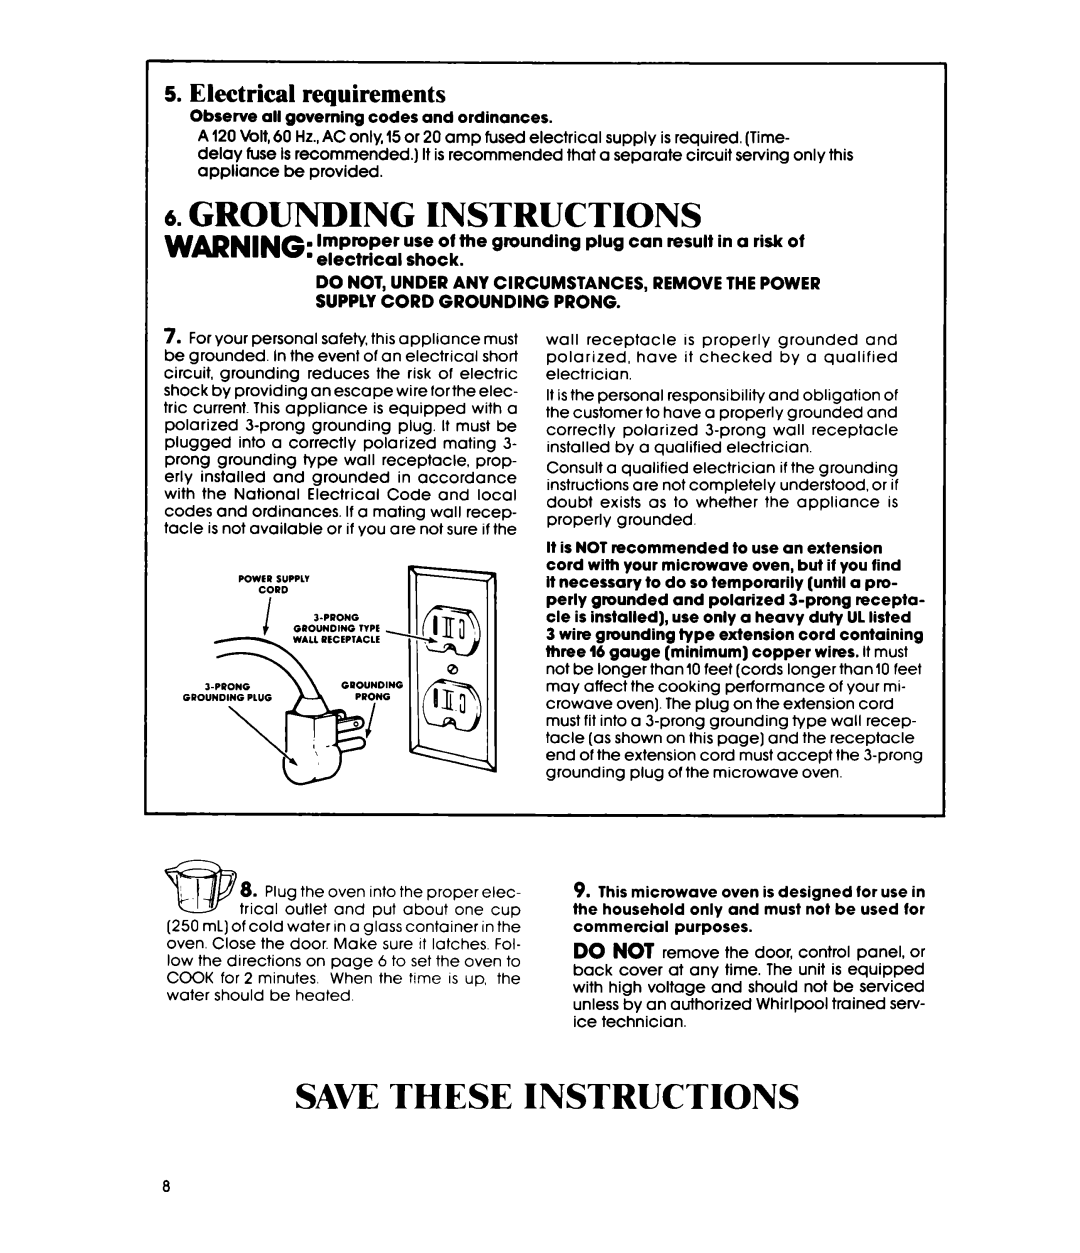 Whirlpool MW3OOOXP Save These Instructions, Improper, use of the grounding plug can result in a risk of, ’ electrical 